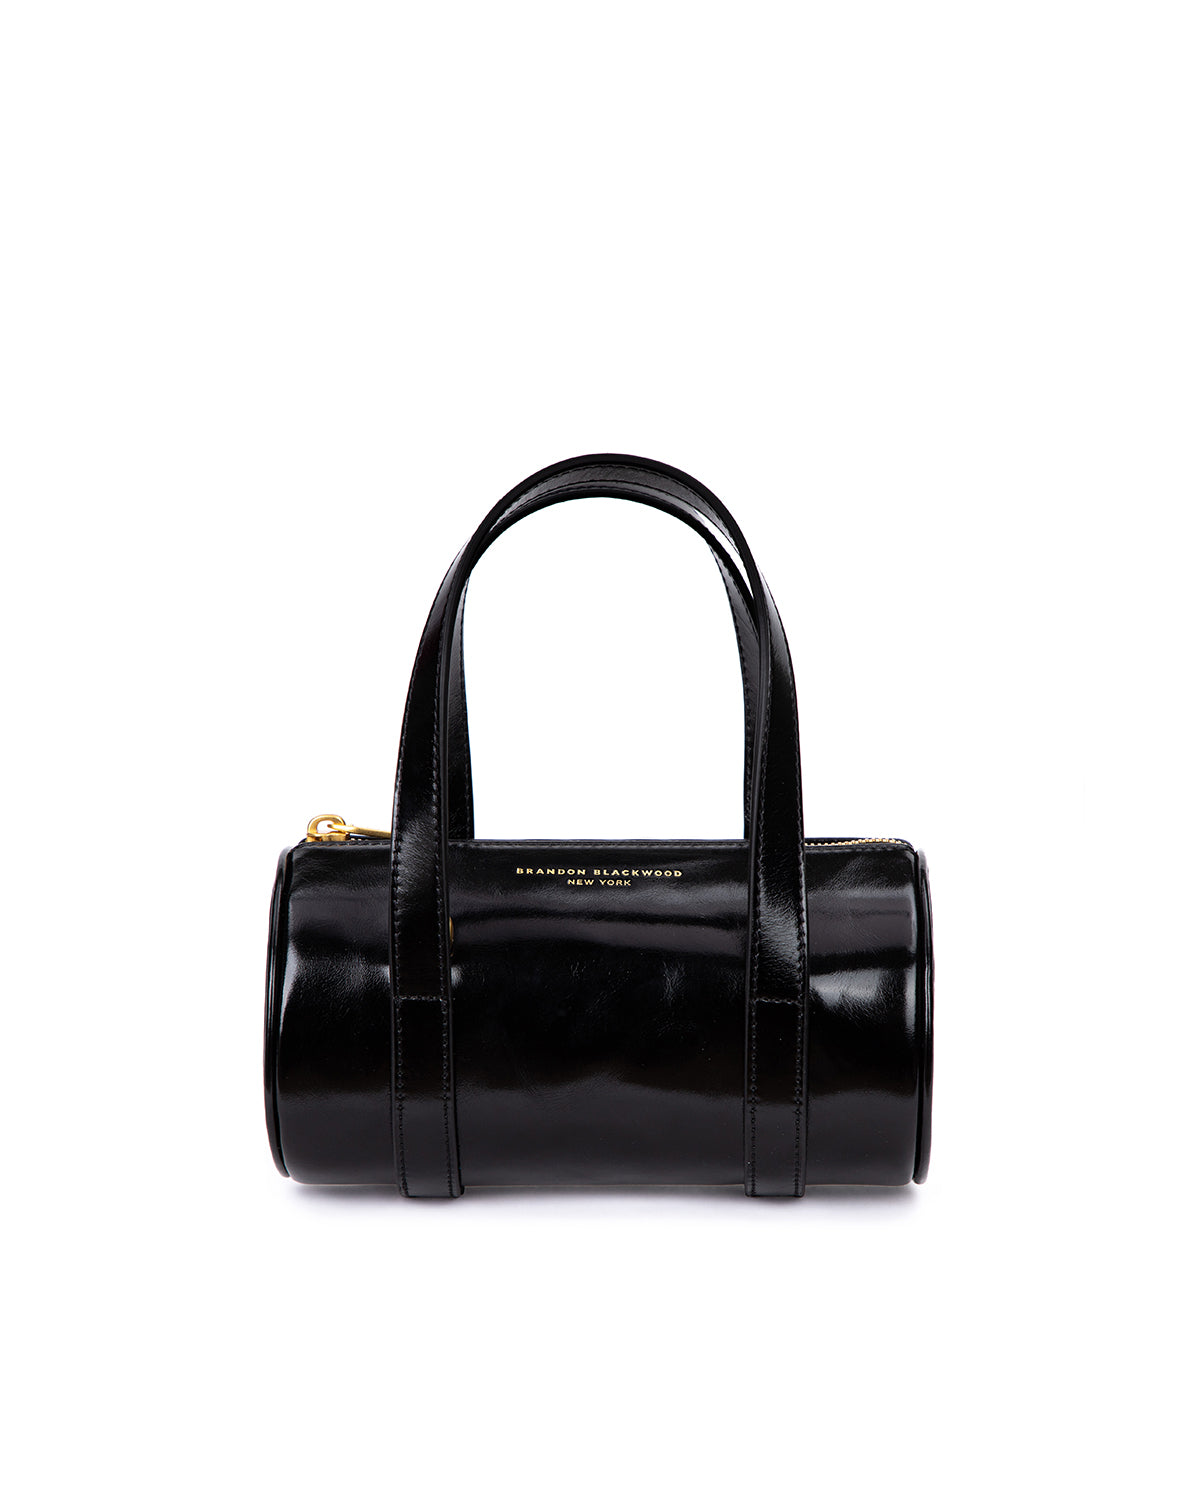 Black Leather Cylinder Mini Purse for Women, Small Barrel Bag Leather